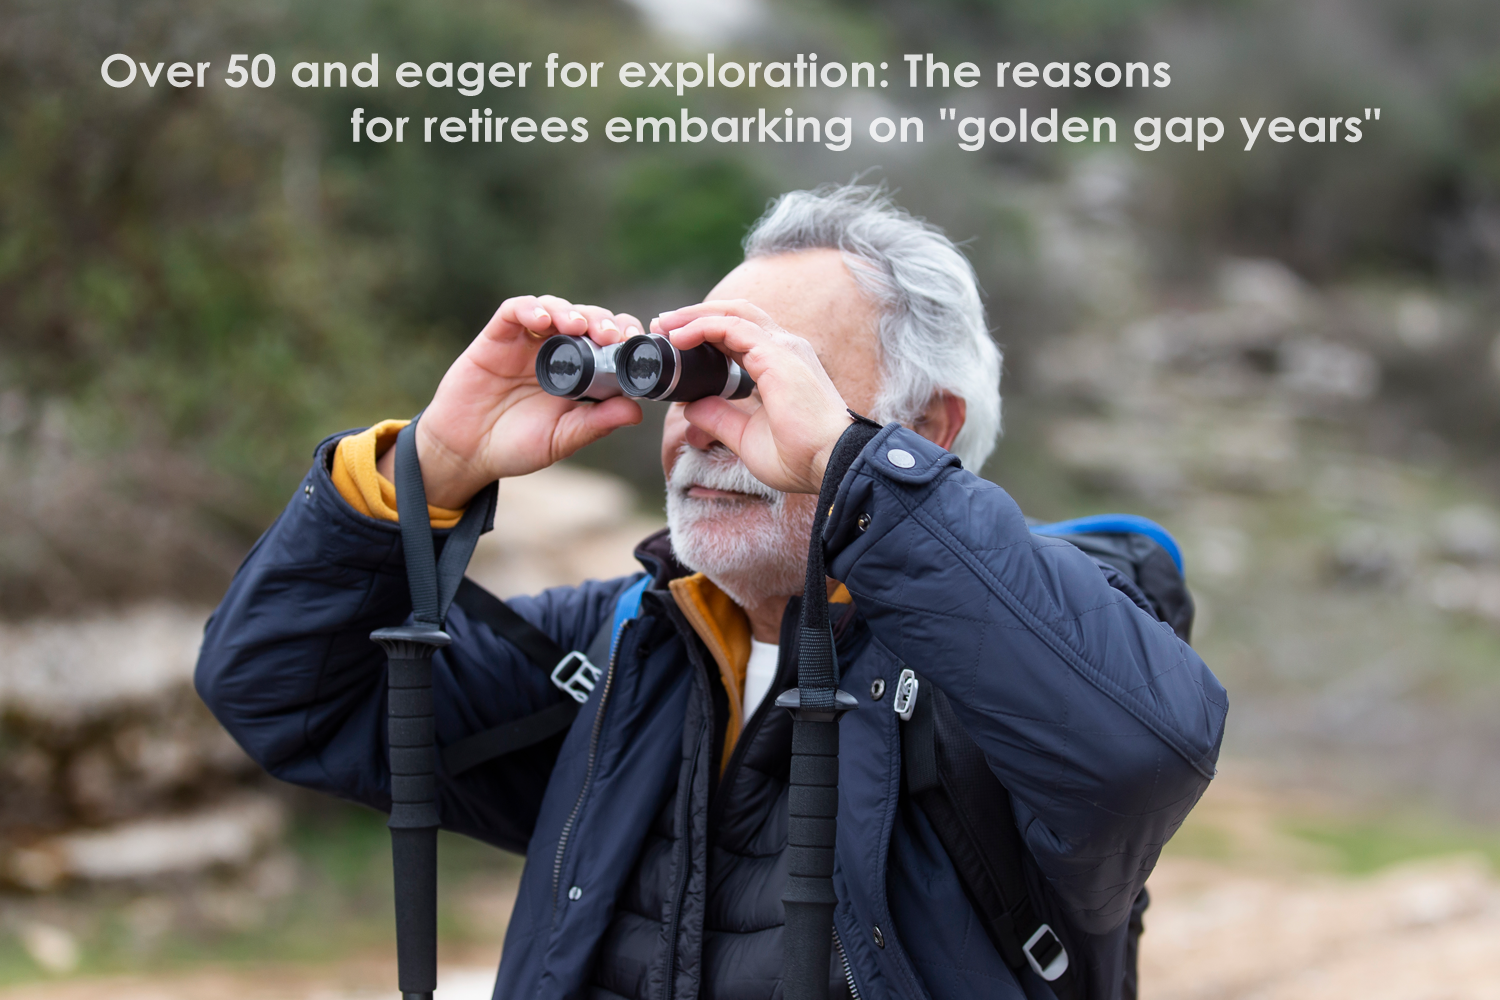 Over 50 and eager for exploration: The reasons for retirees embarking on 